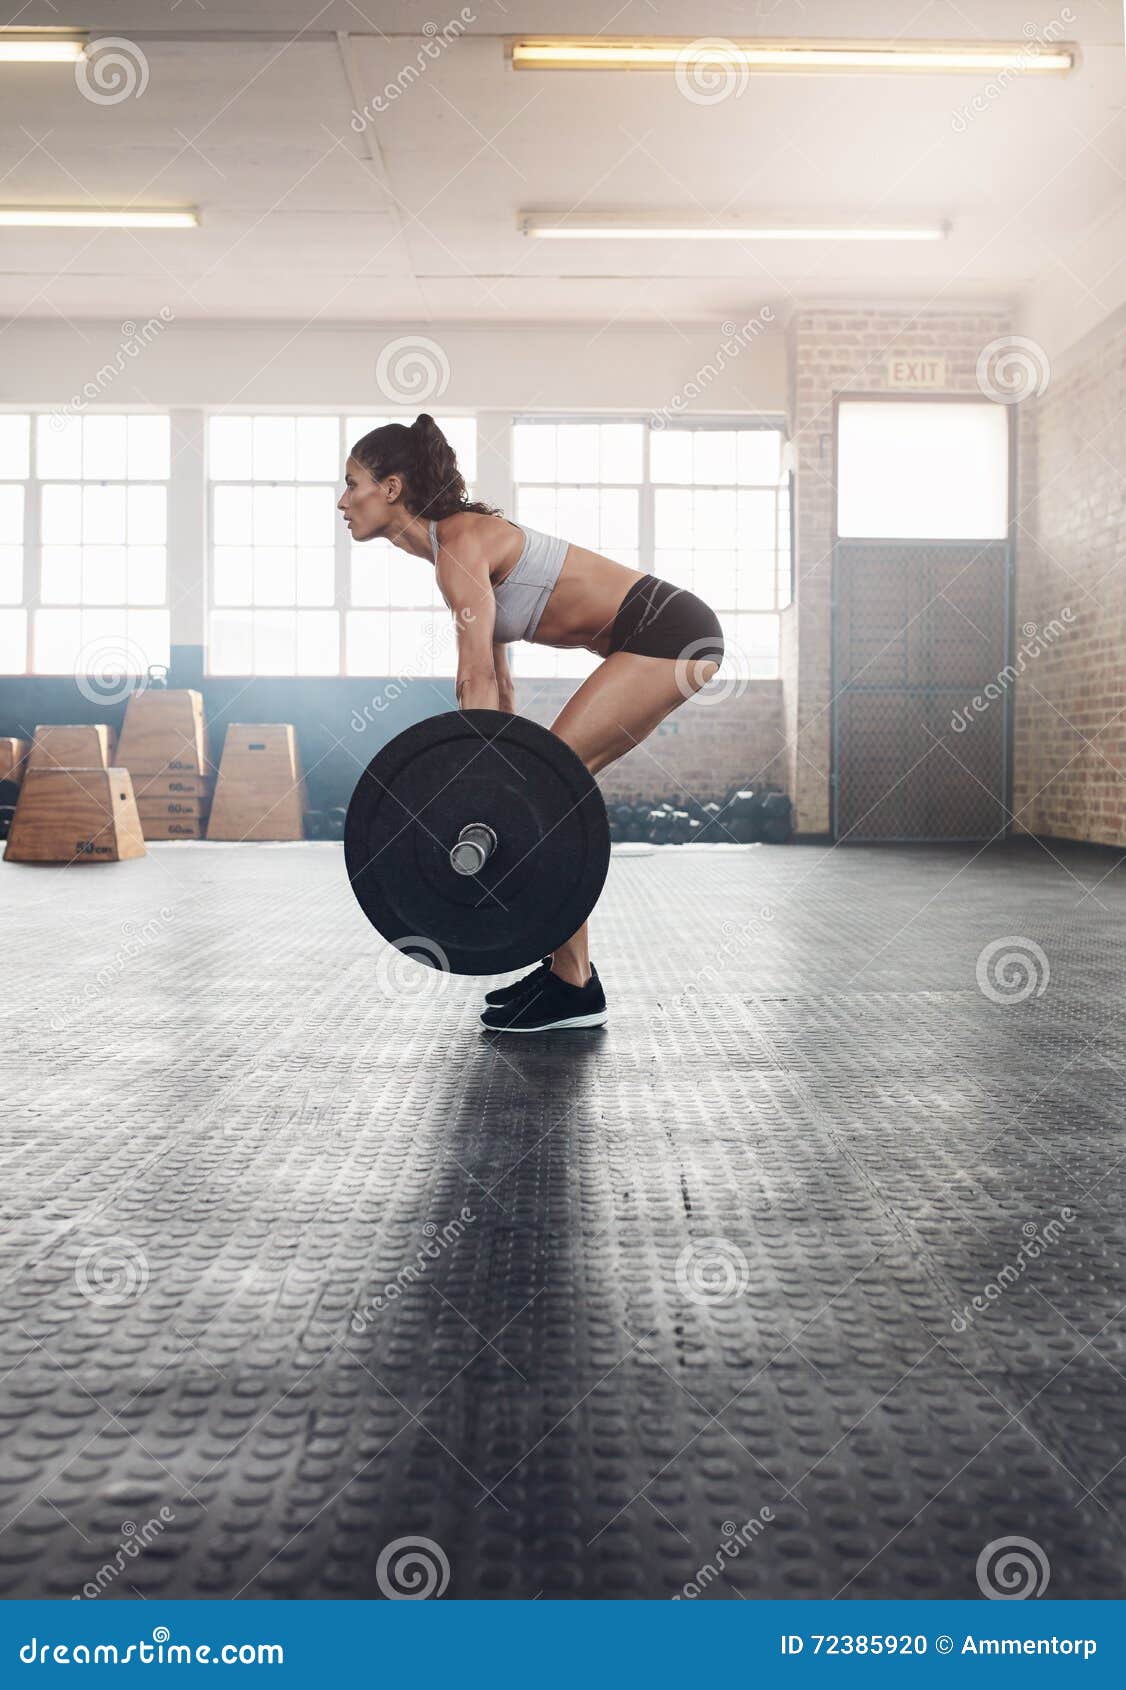 Fitness Woman Doing Weightlifting Exercise Stock Photo - Image of ...